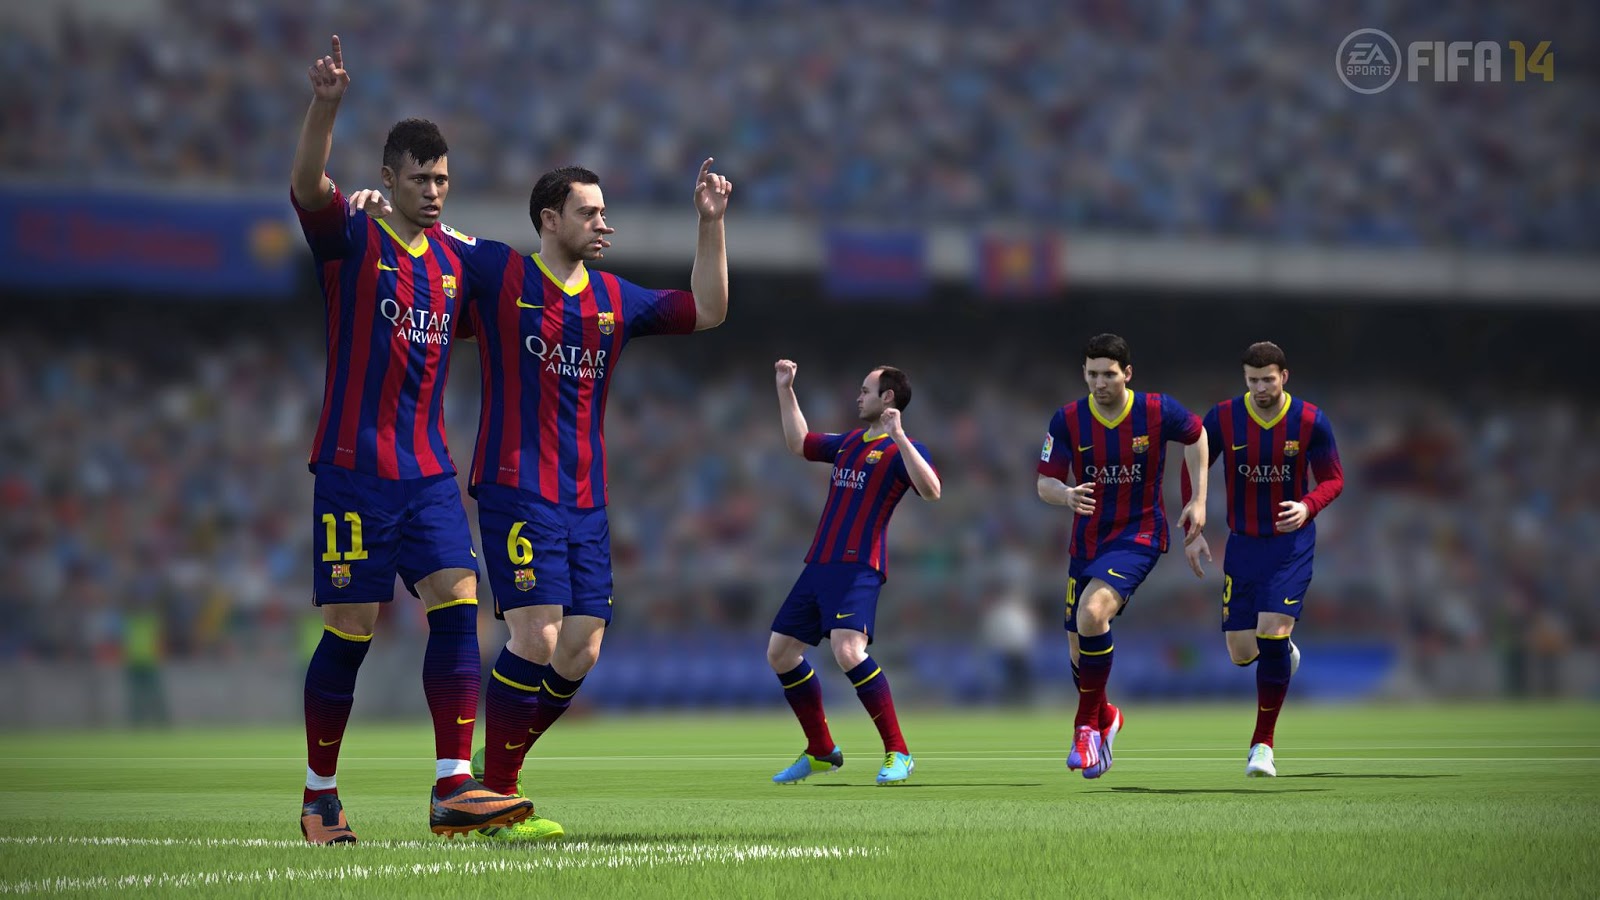 Fifa 13 game download for pc free version